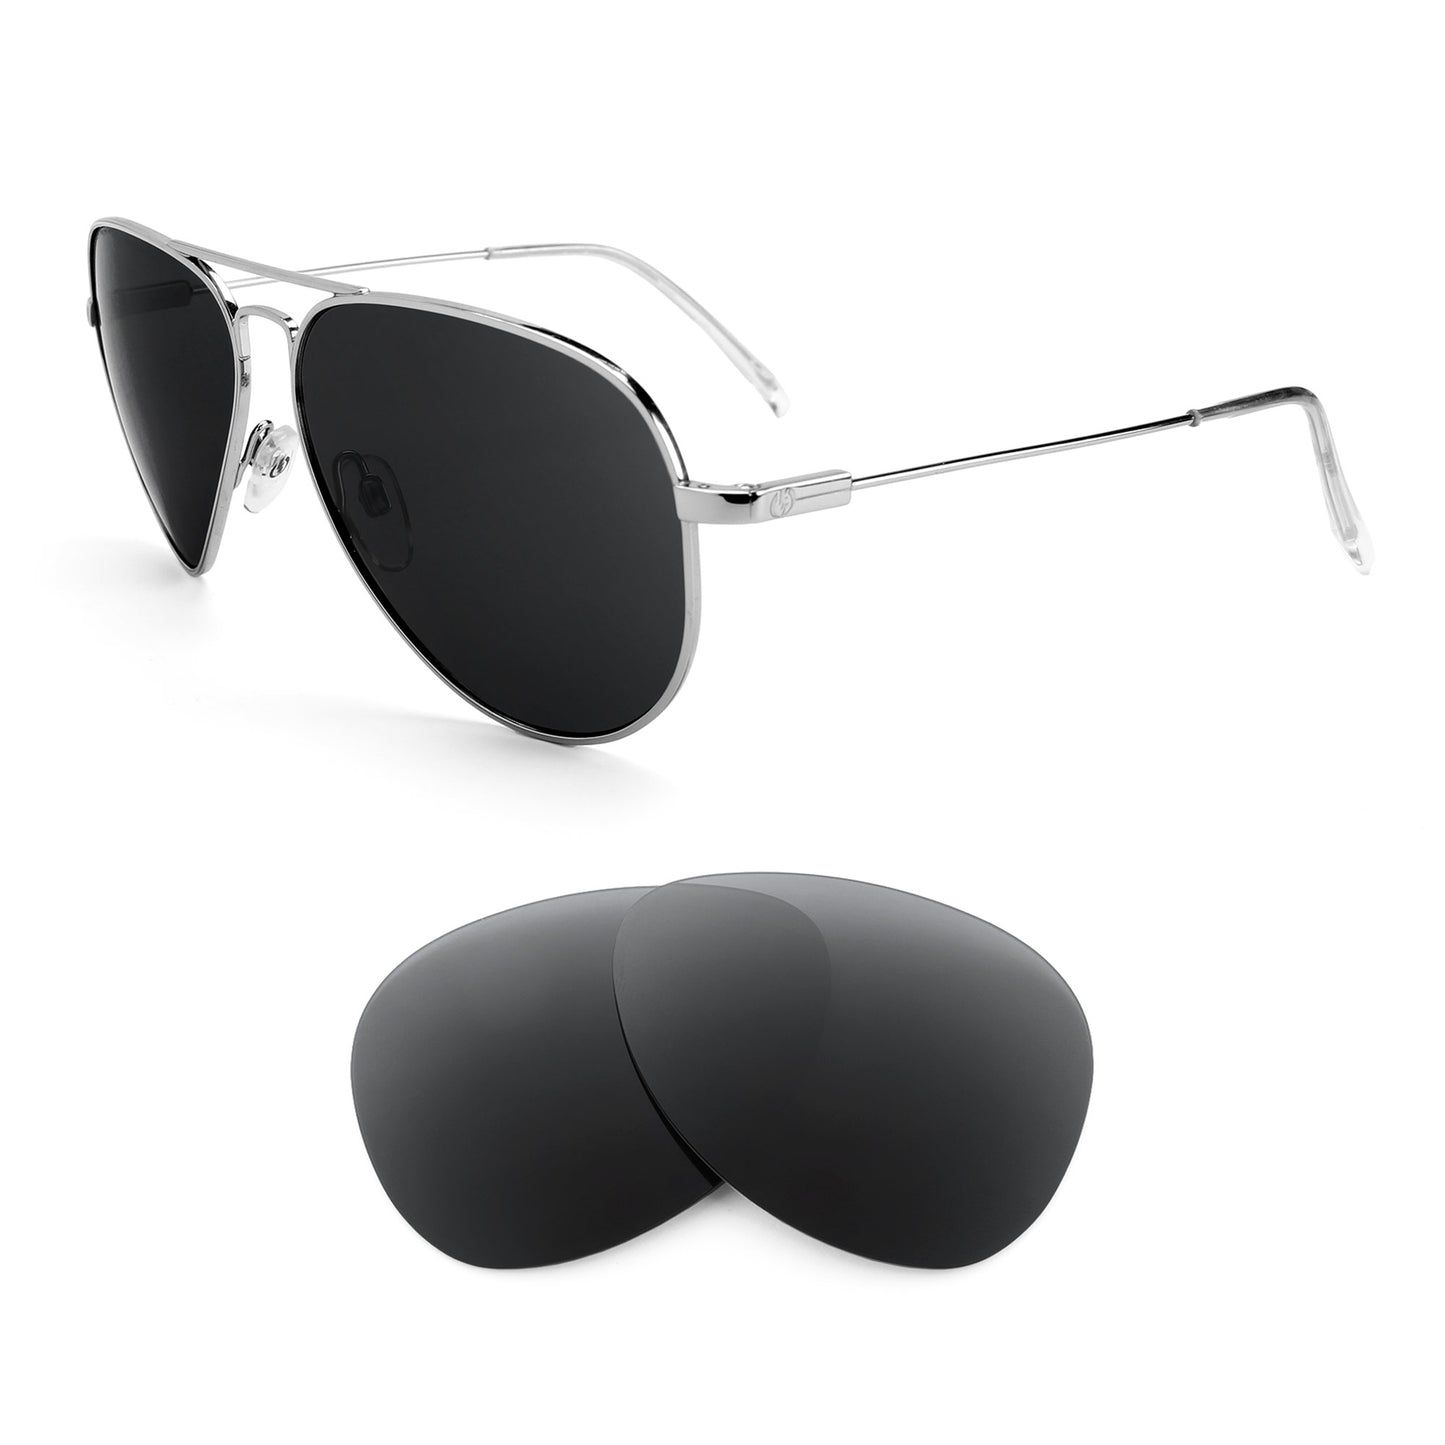 Electric AV1 sunglasses with replacement lenses